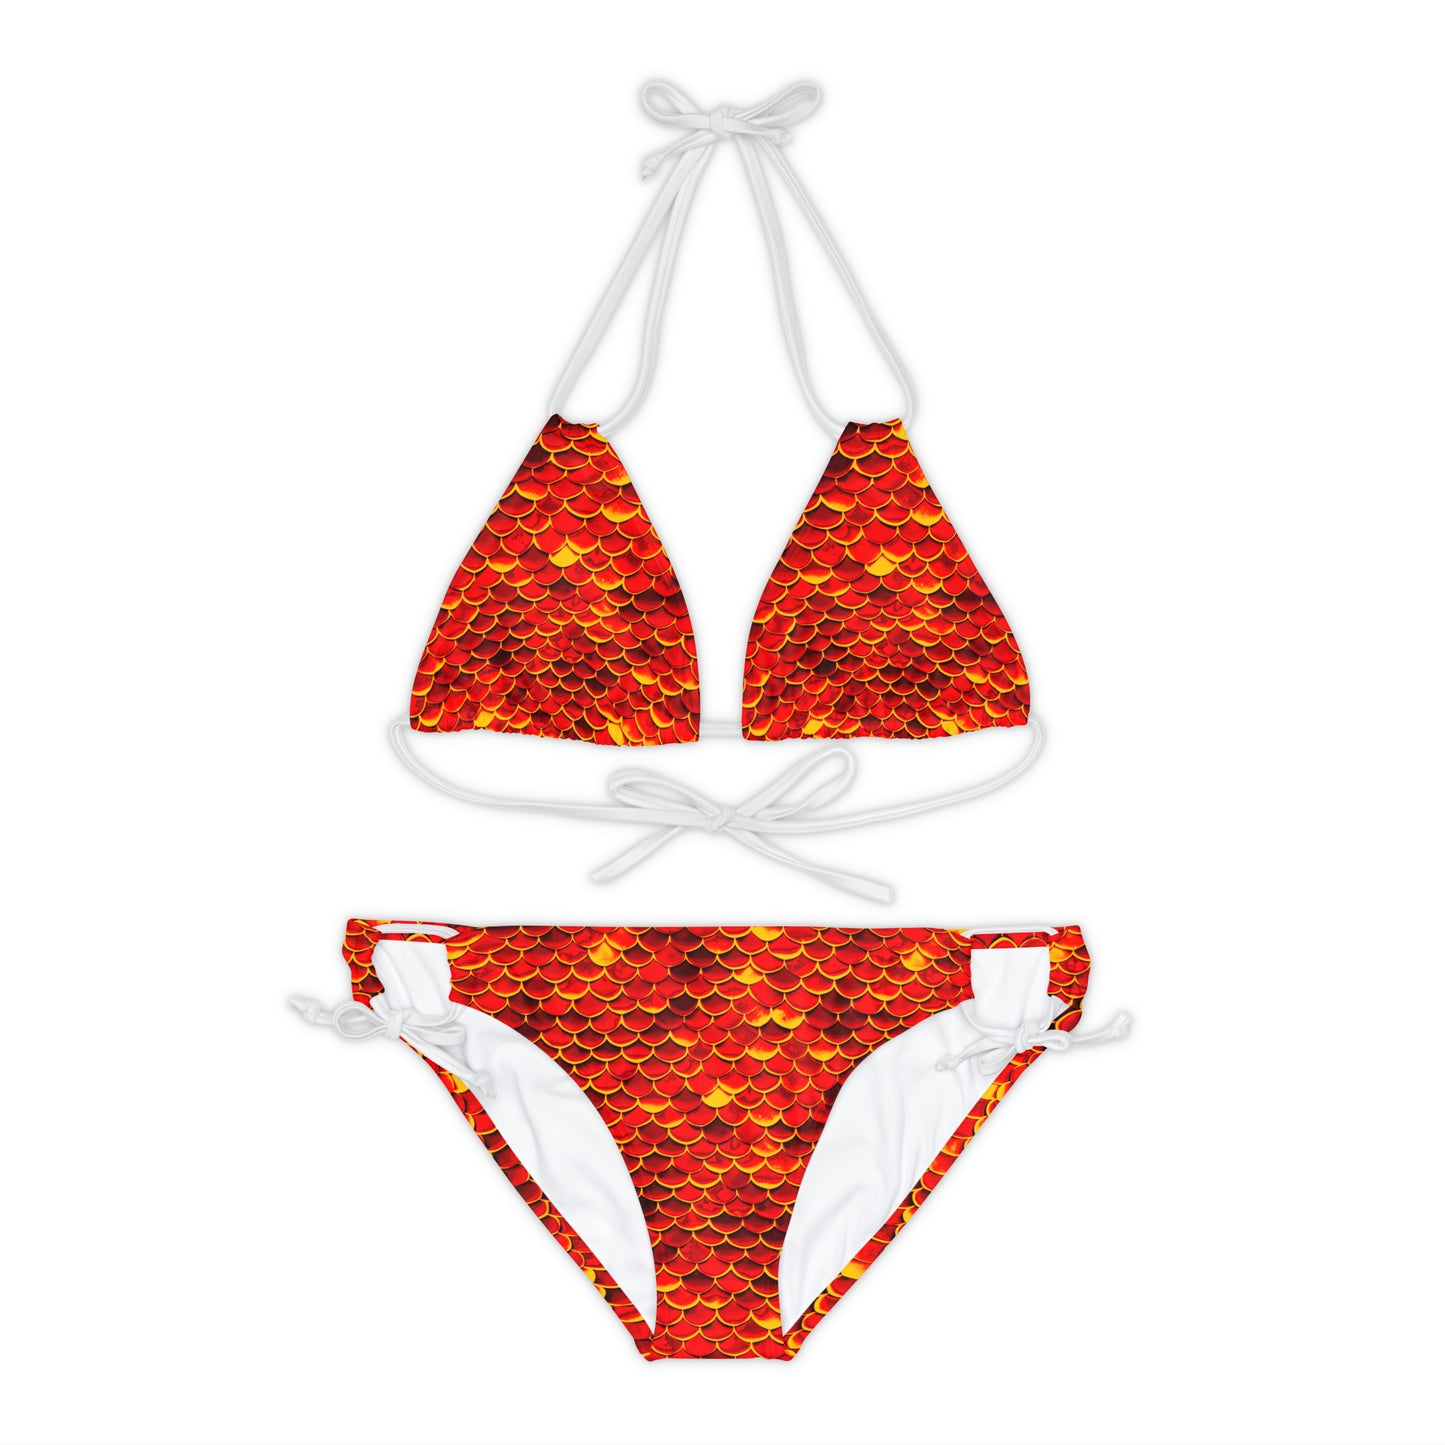 Red Little Mermaid Ariel Inspired Bikini Set, Charming Ocean-Inspired Fashion with Fish Scale Designs! Women's Top & Bottom Swimsuit